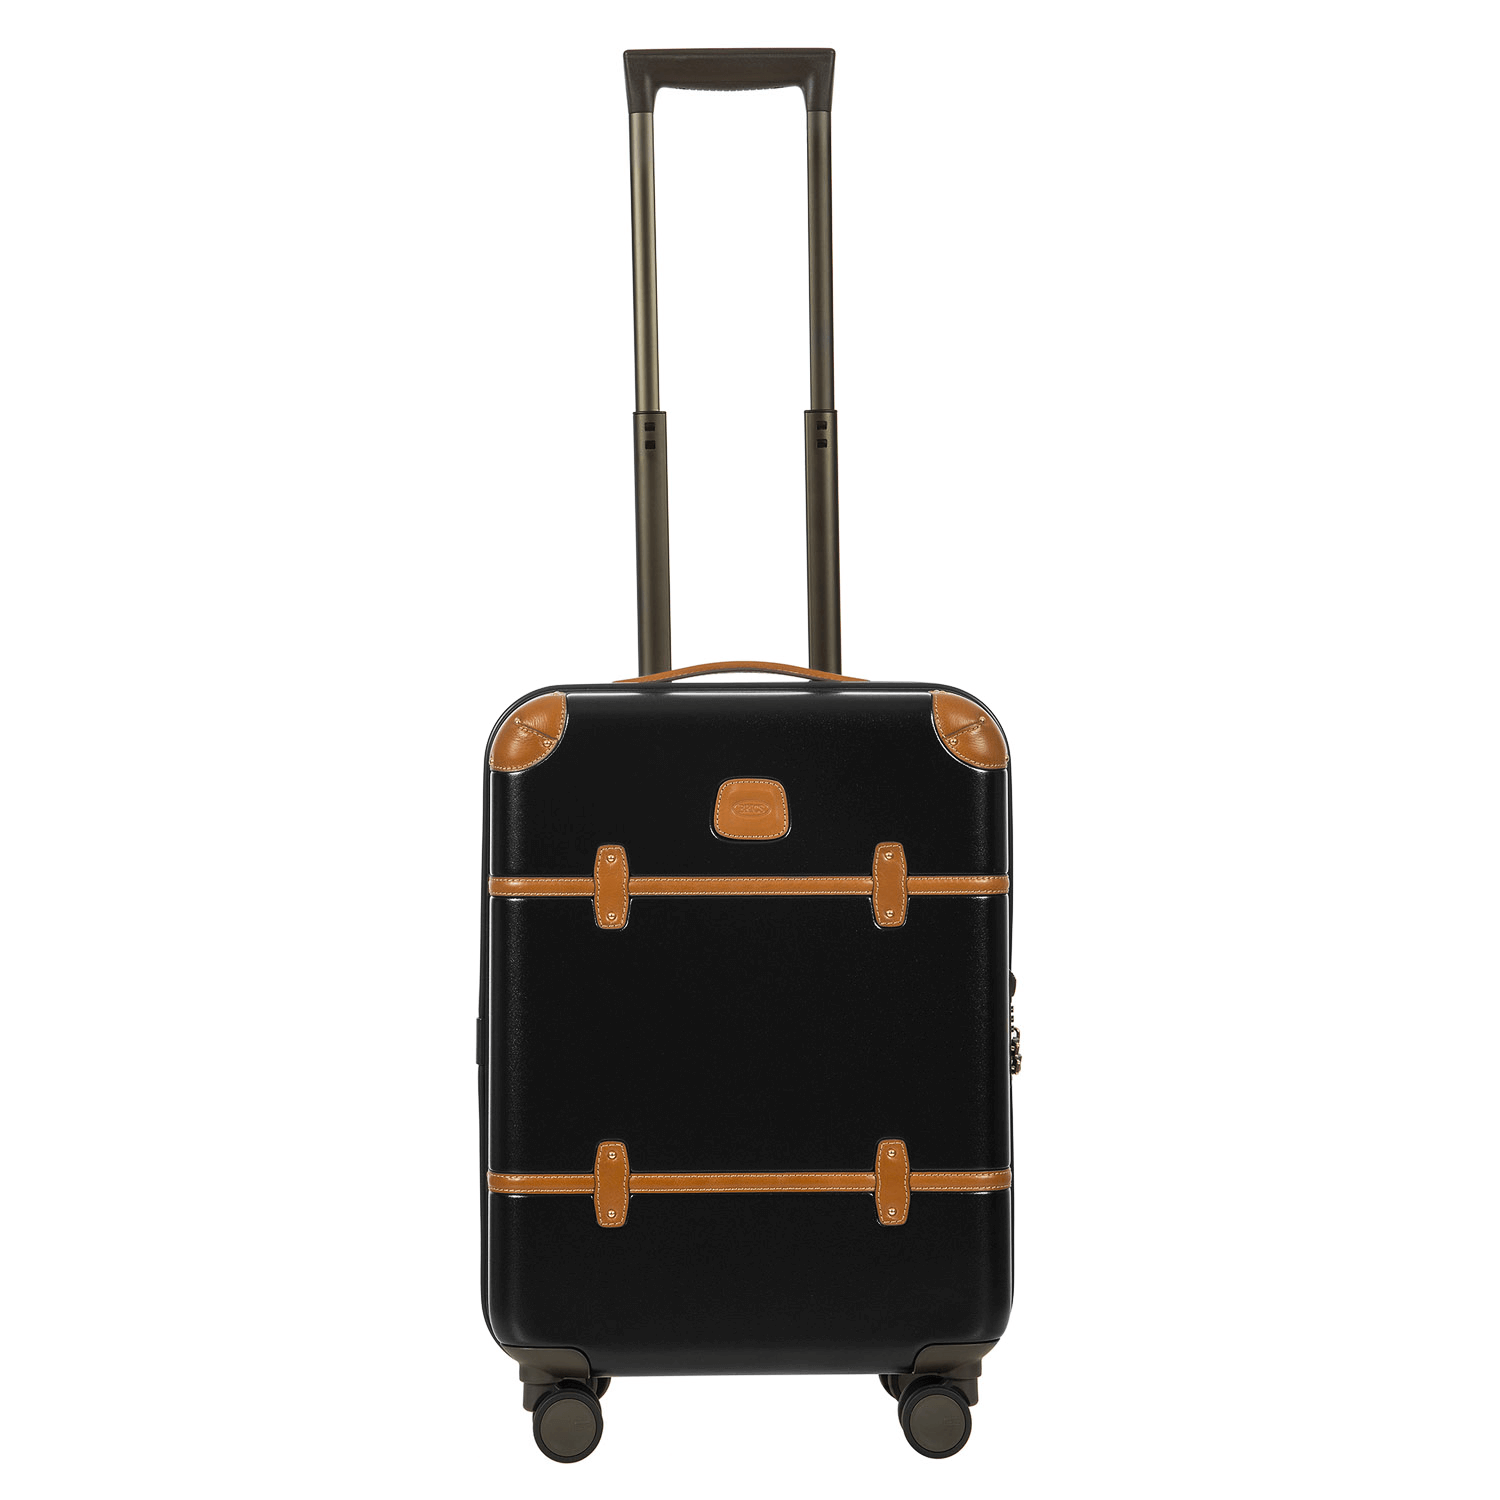 BELLAGIO CARRY-ON SPINNER